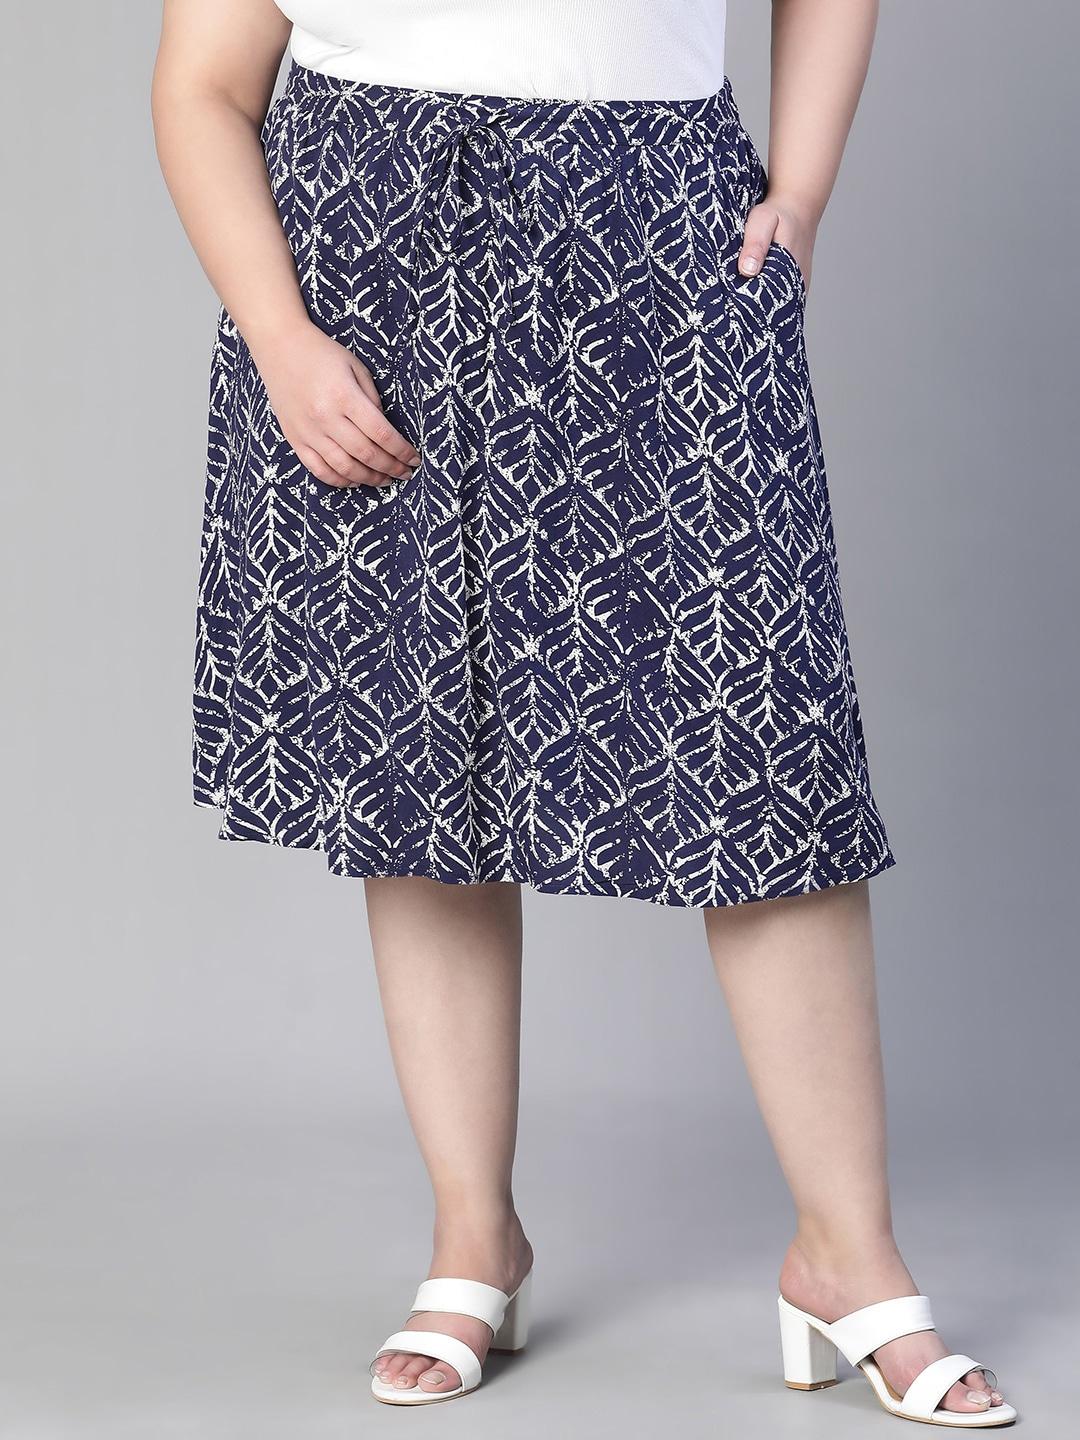 Oxolloxo Plus Size Floral Printed Flared Midi Skirt